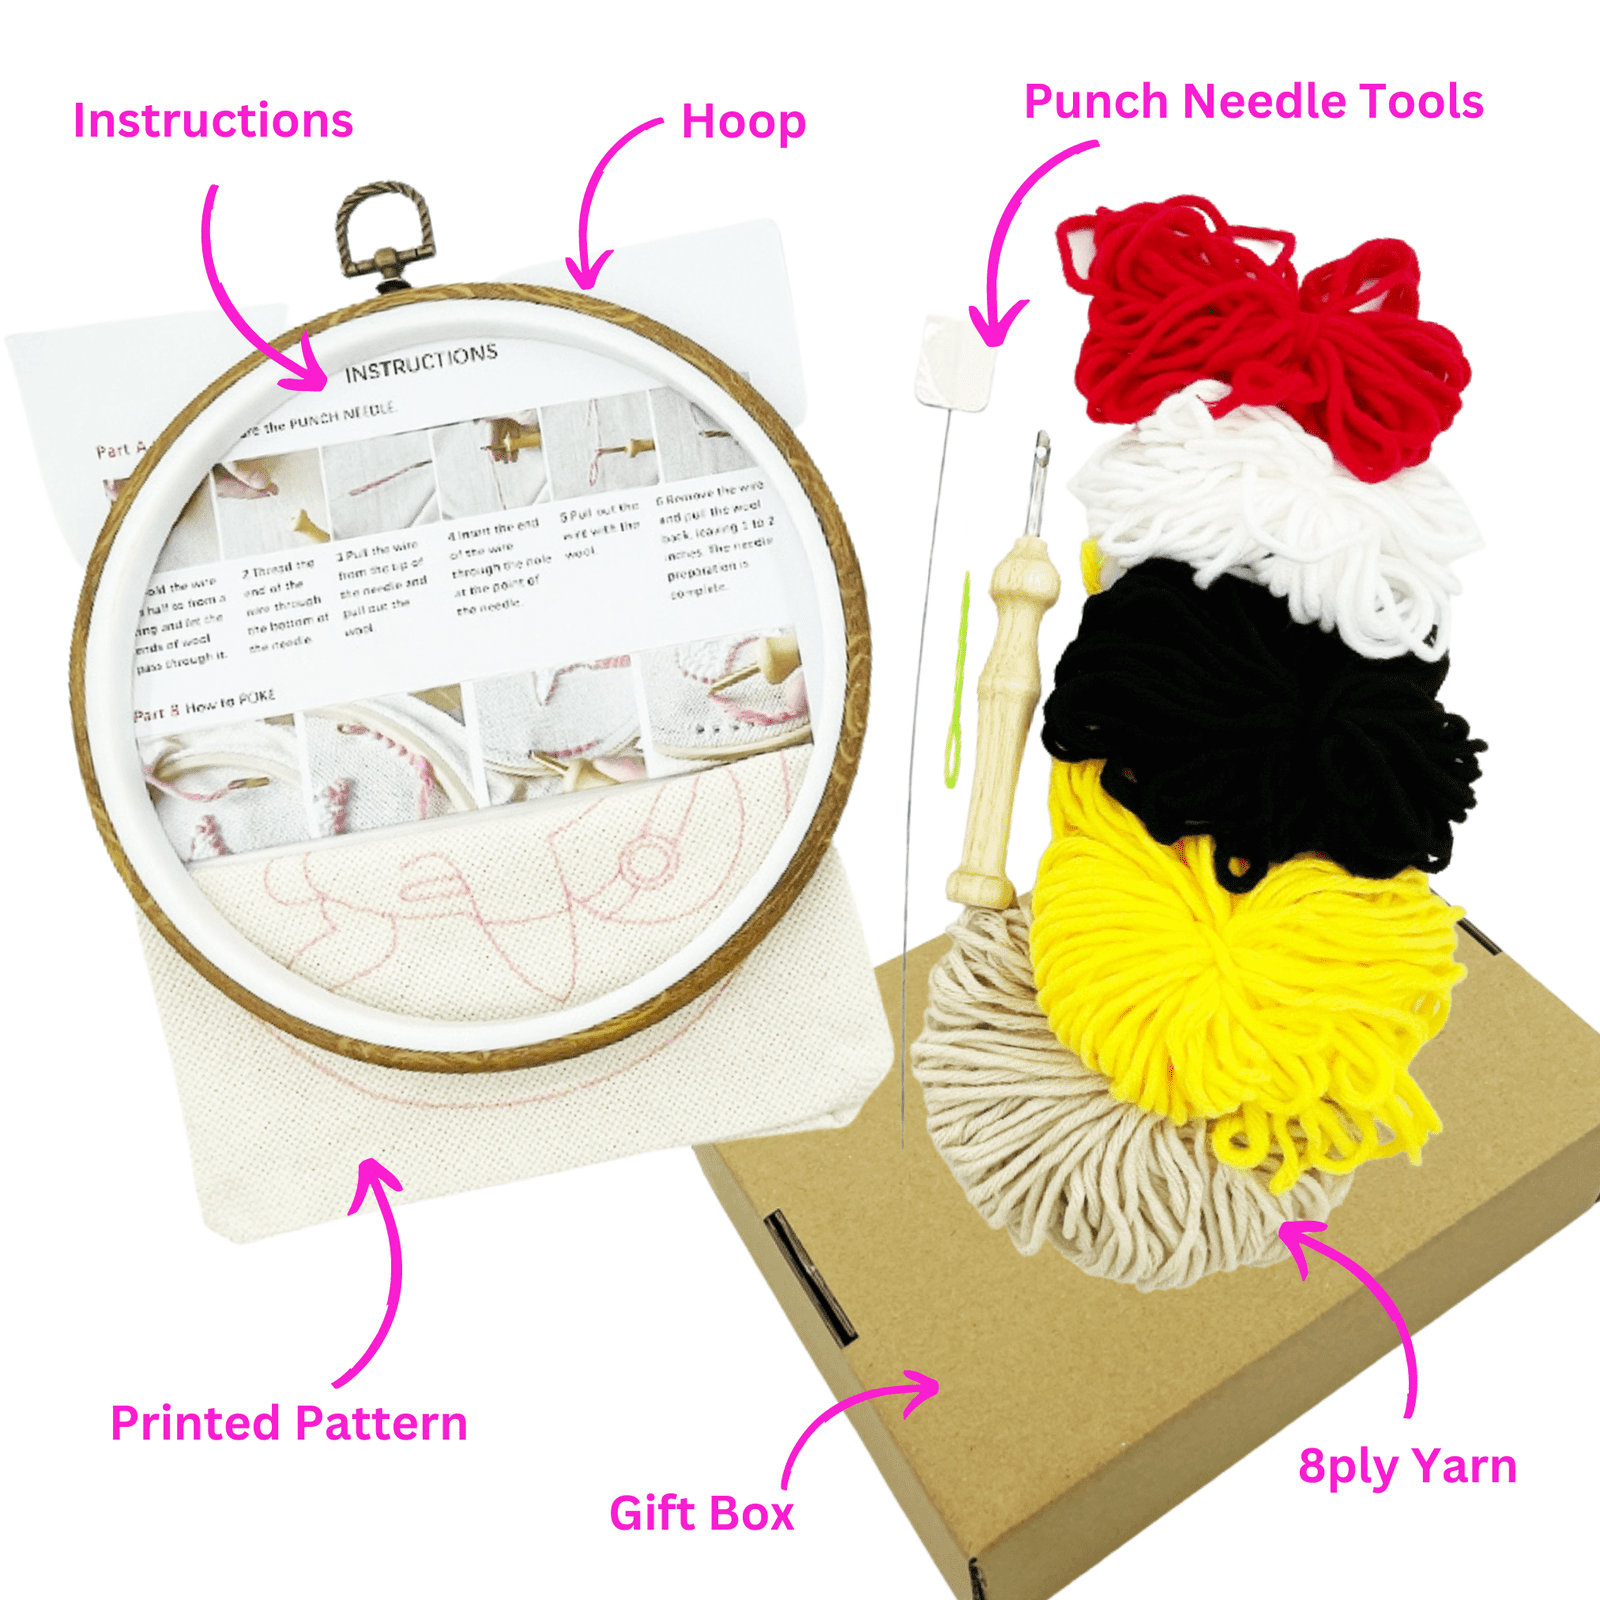 Embroidery Scenery Punch Needle Kits - Grassy Hills Embroidery